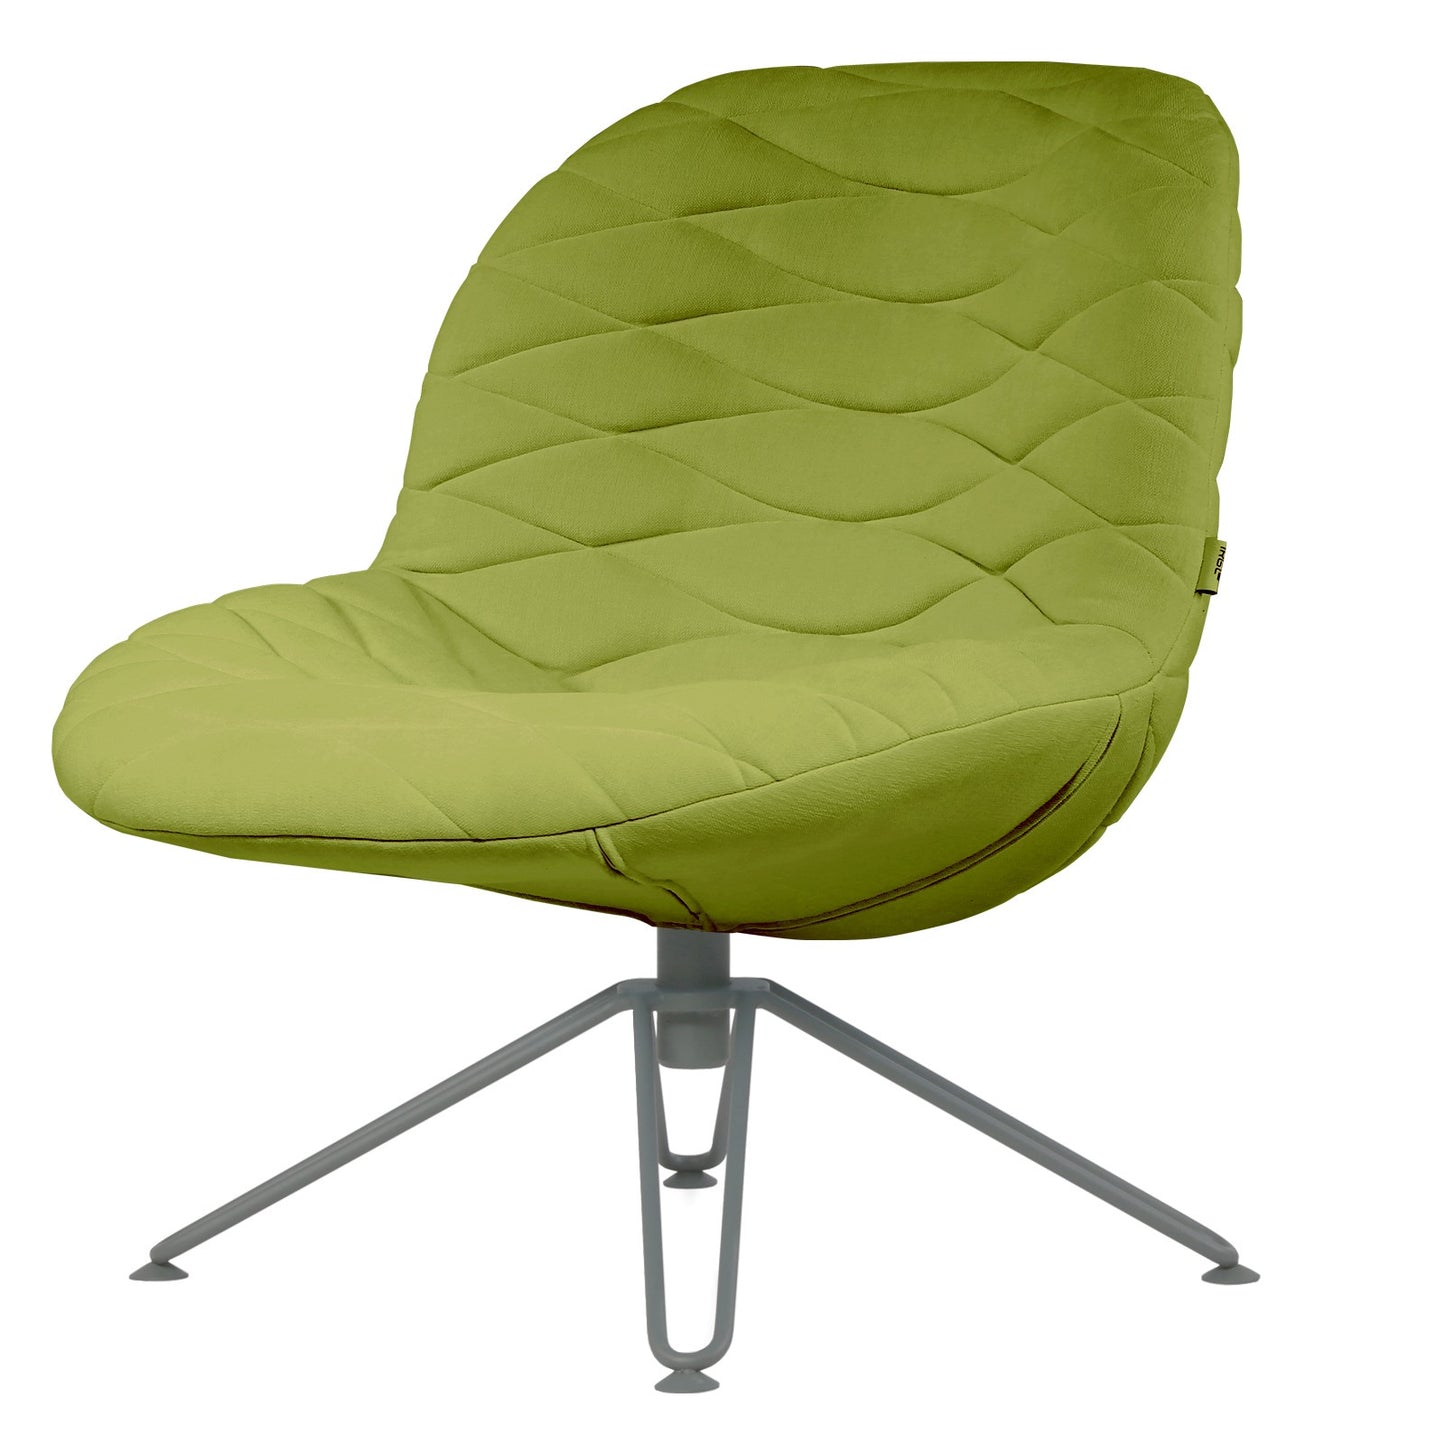 Lounge chair Mannequin Lounge 03 - Green